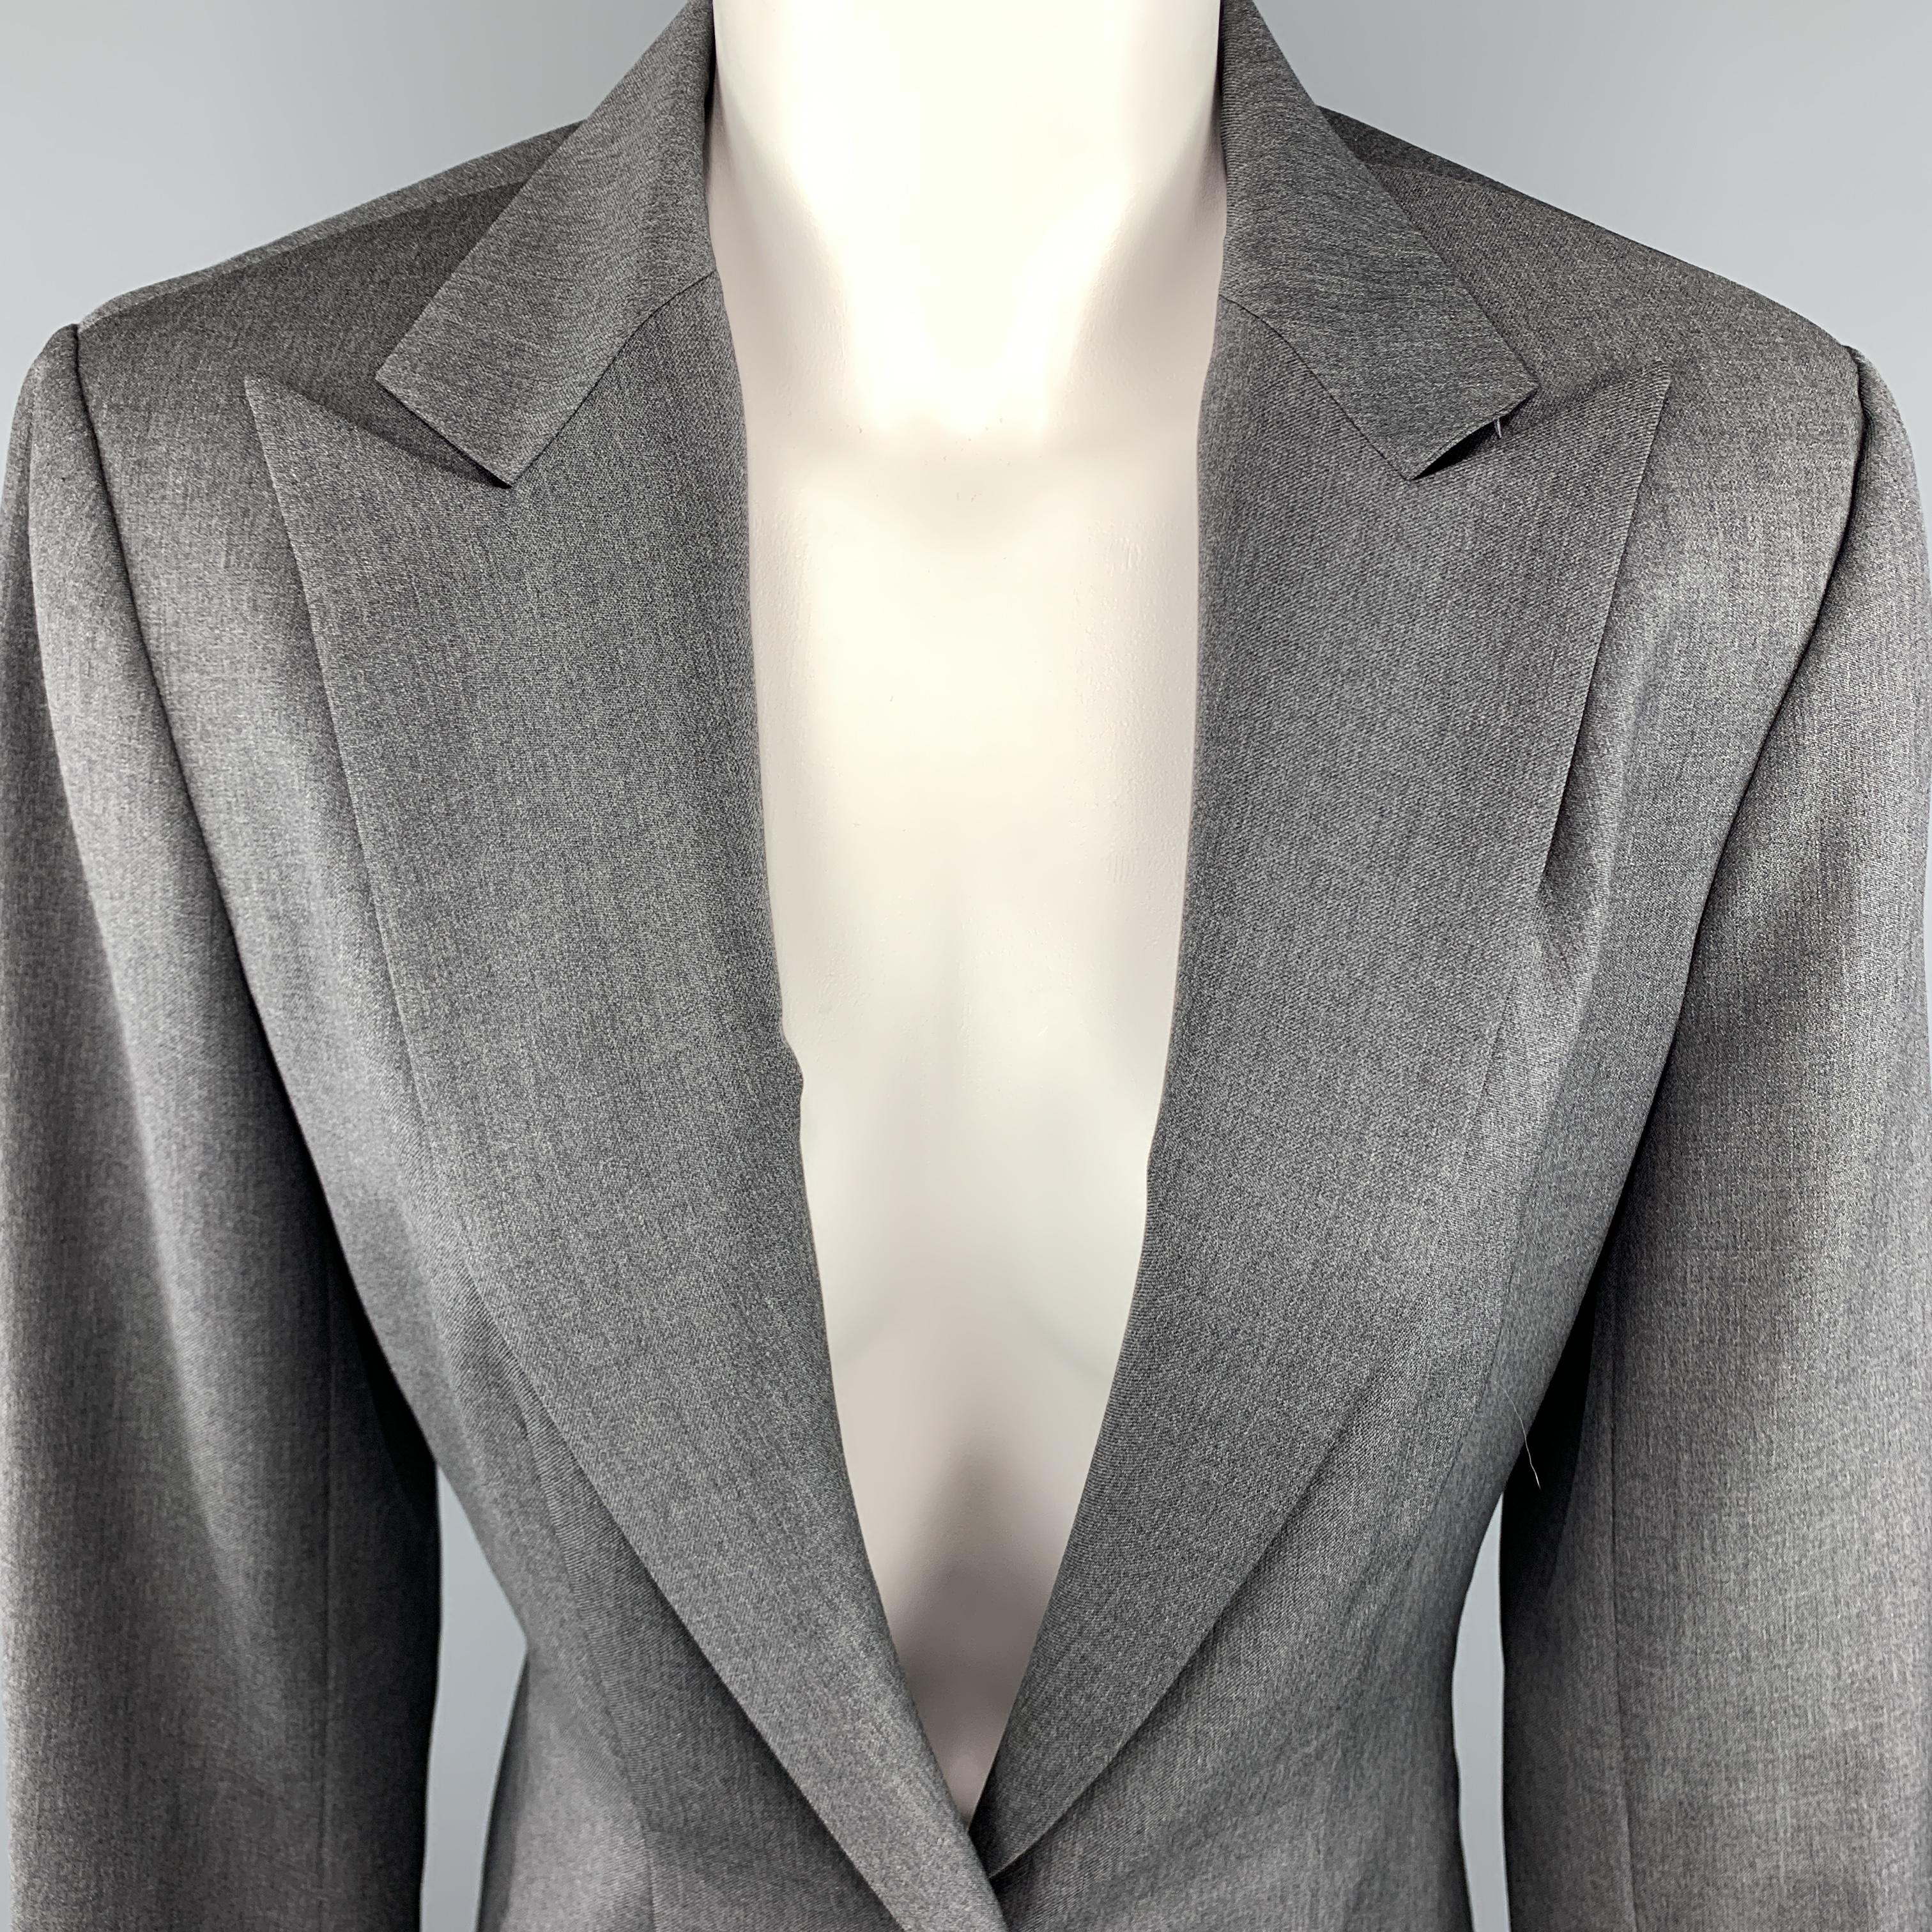 RICHARD TYLER Indoor Blazer comes in a grey tone in a solid gabardine material, with a peak lapel, a single button at closure, single breasted, with functional buttons at cuffs, a single vent at back, unlined. Minor wear at shoulder. Made in USA.
